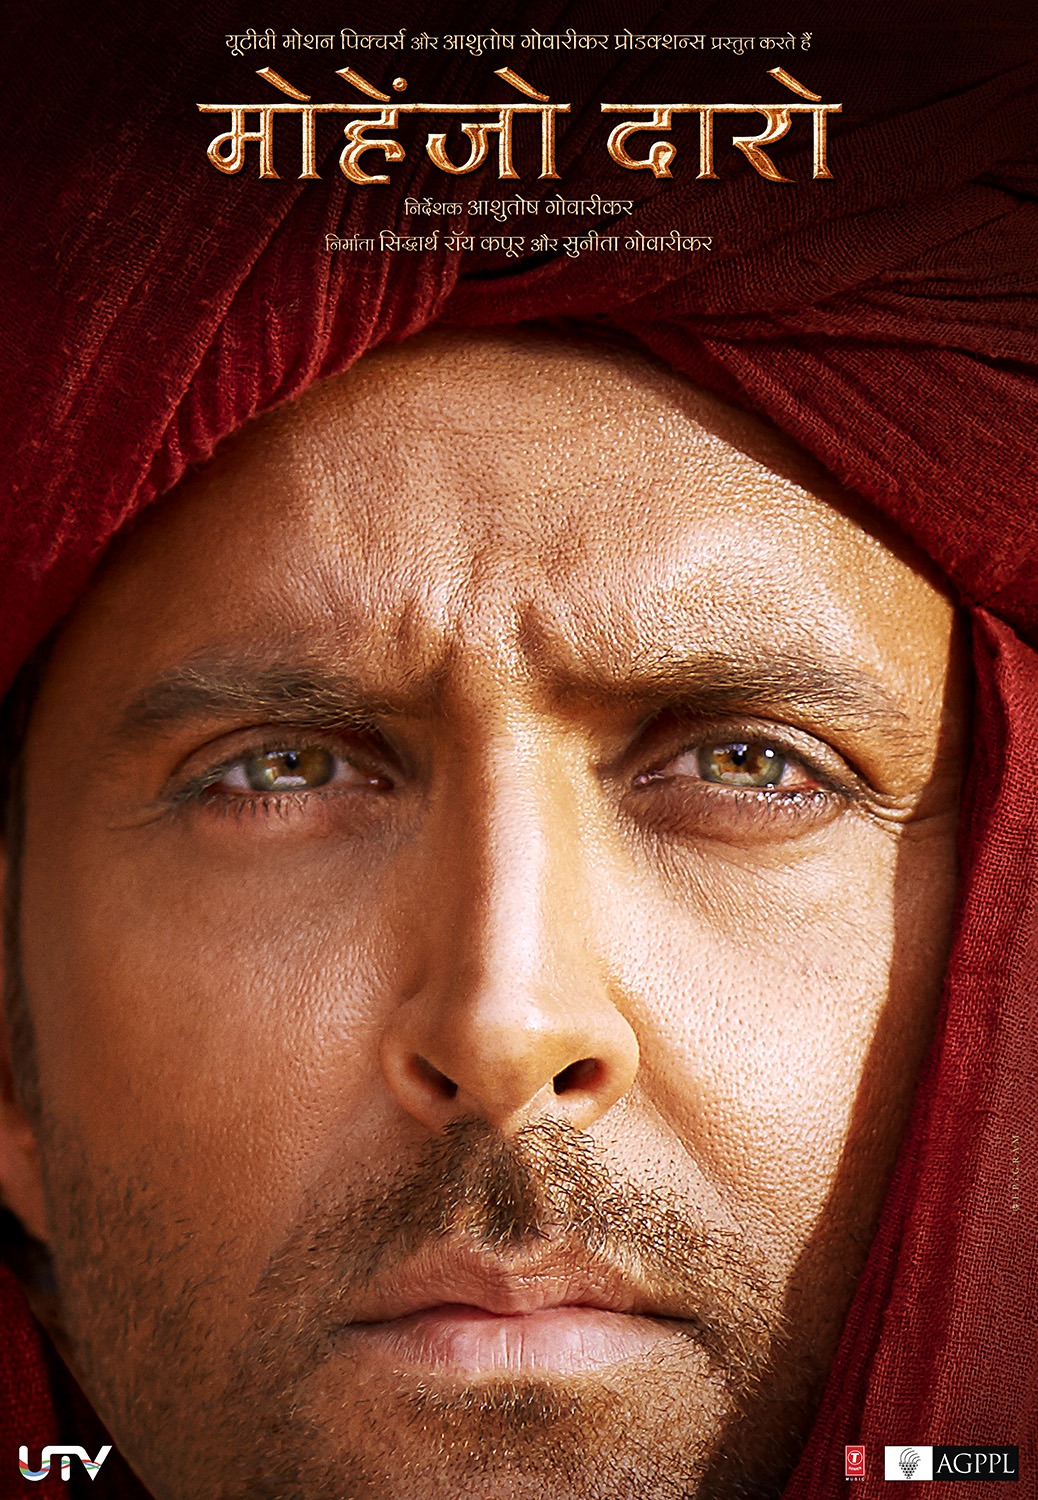 Extra Large Movie Poster Image for Mohenjo Daro (#5 of 11)